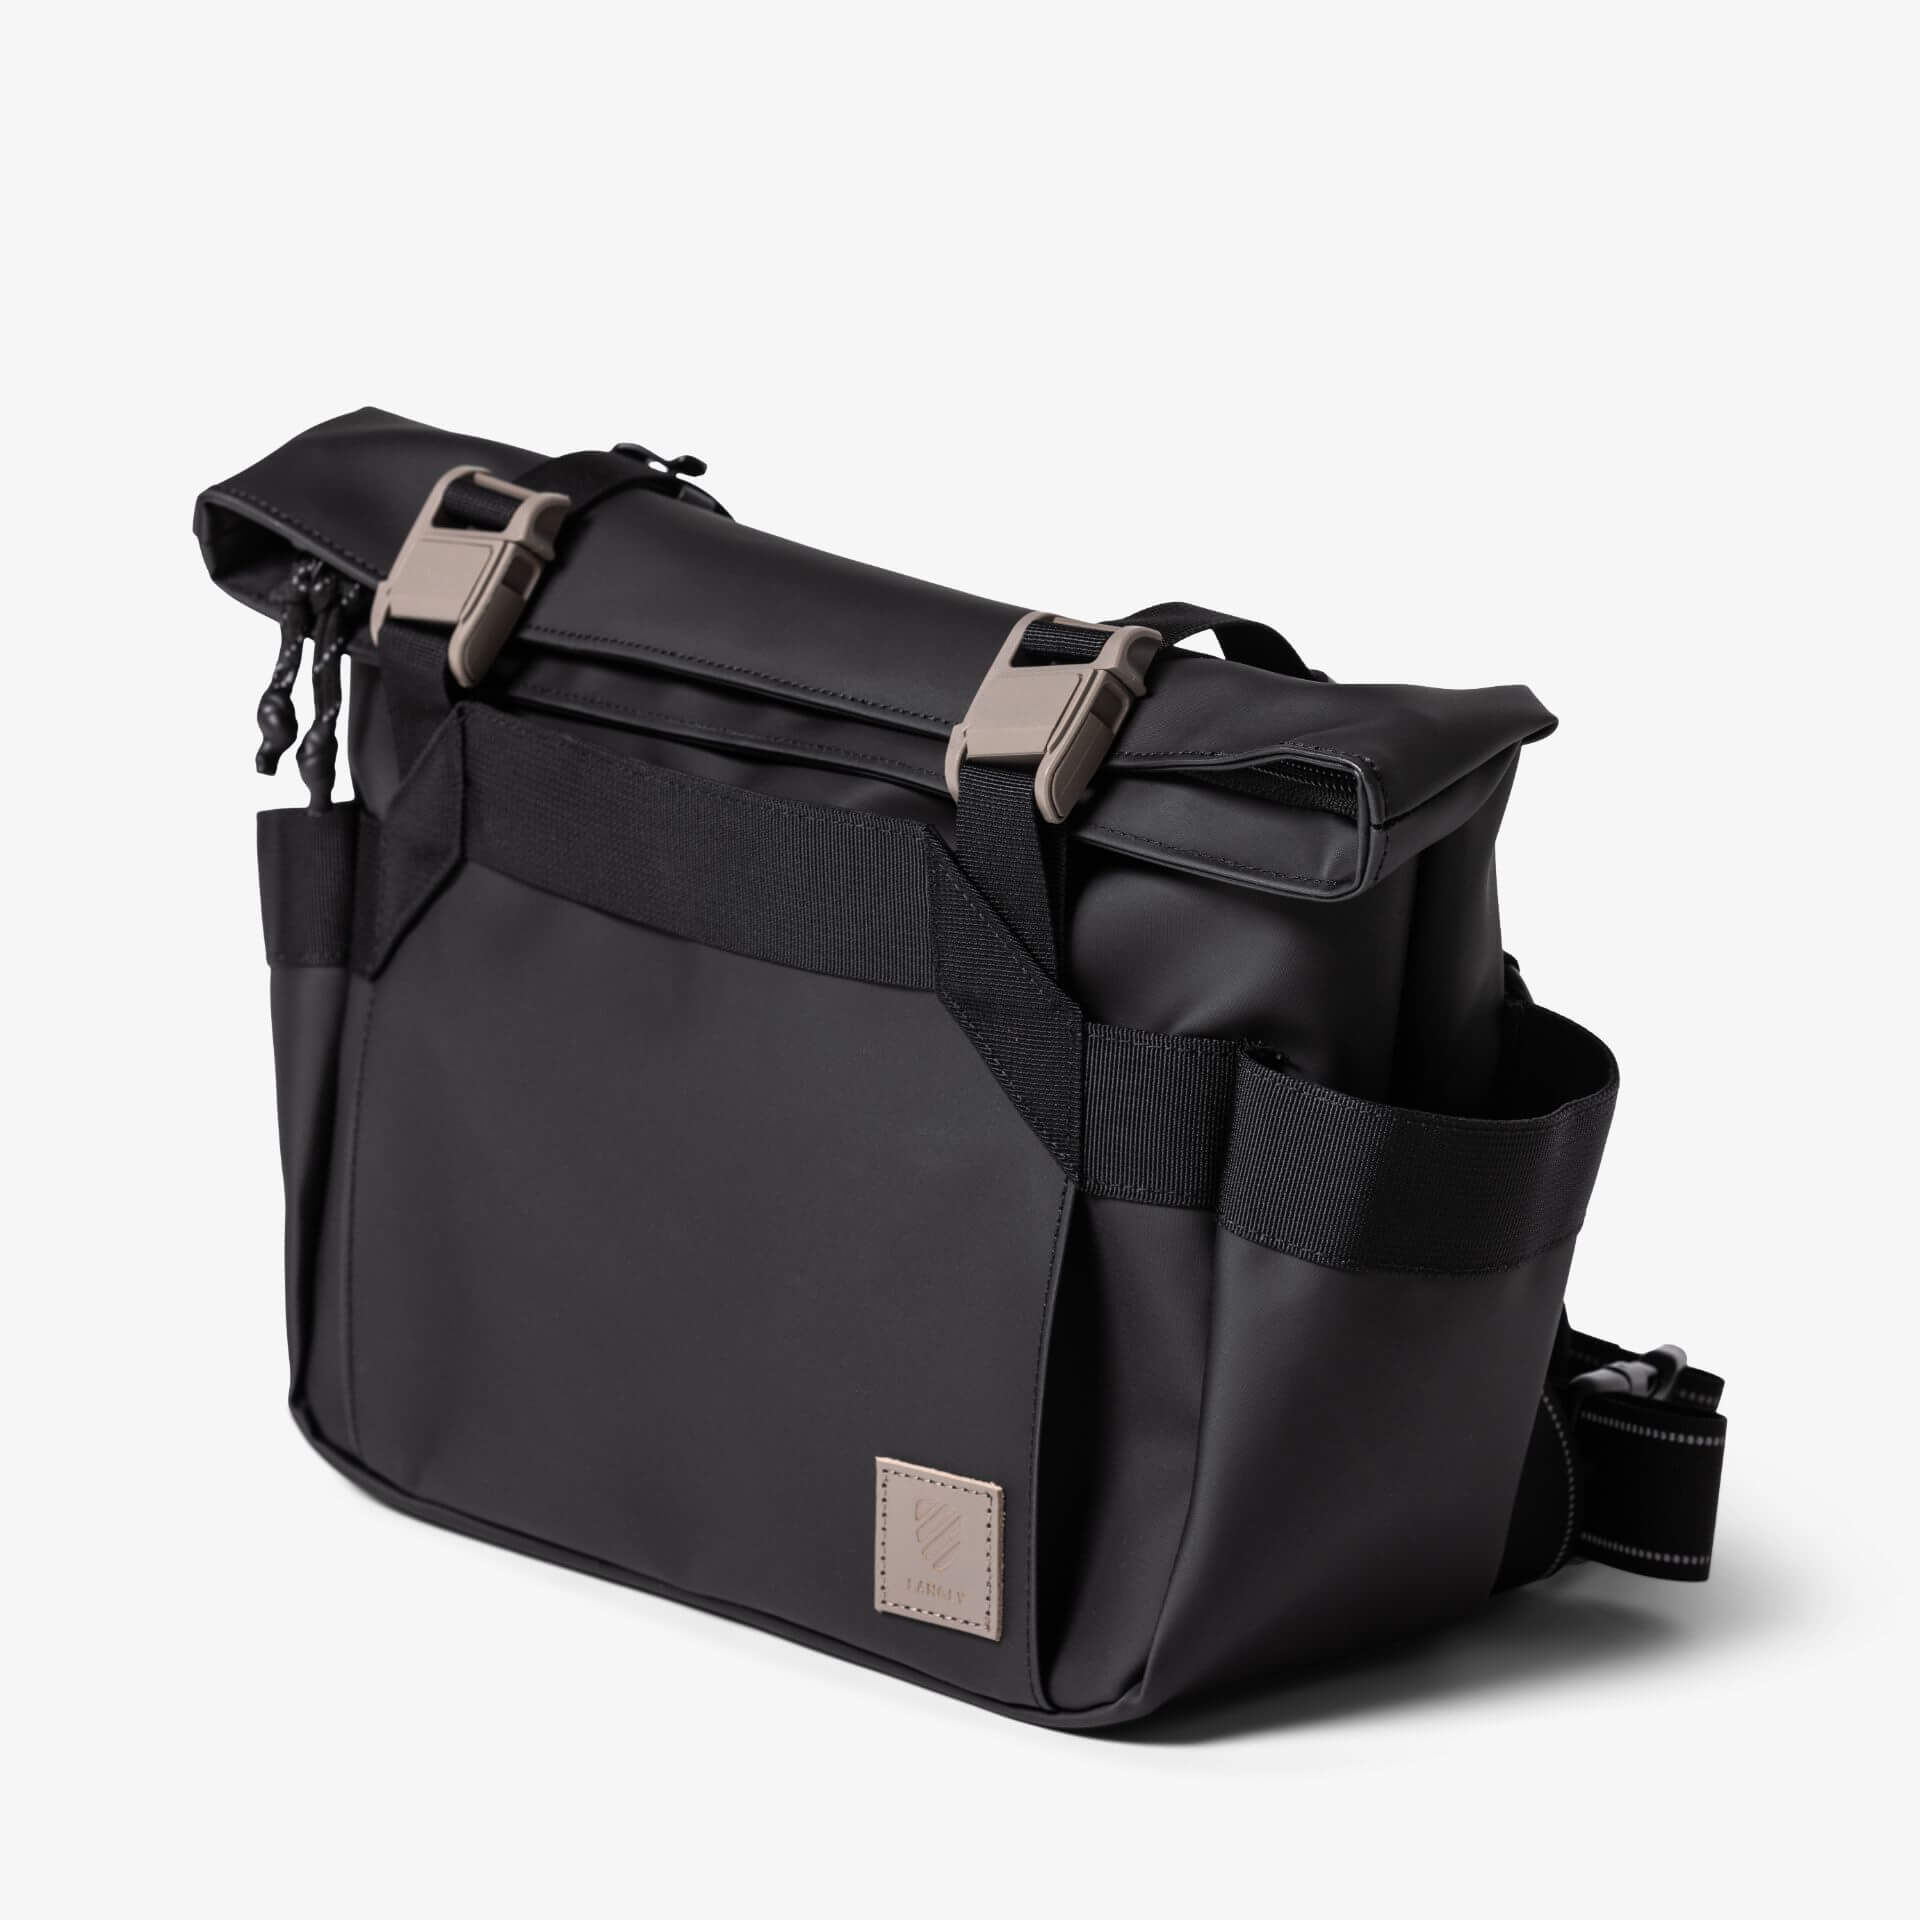 OFF-WHITE Courrier Camera Bag in Black